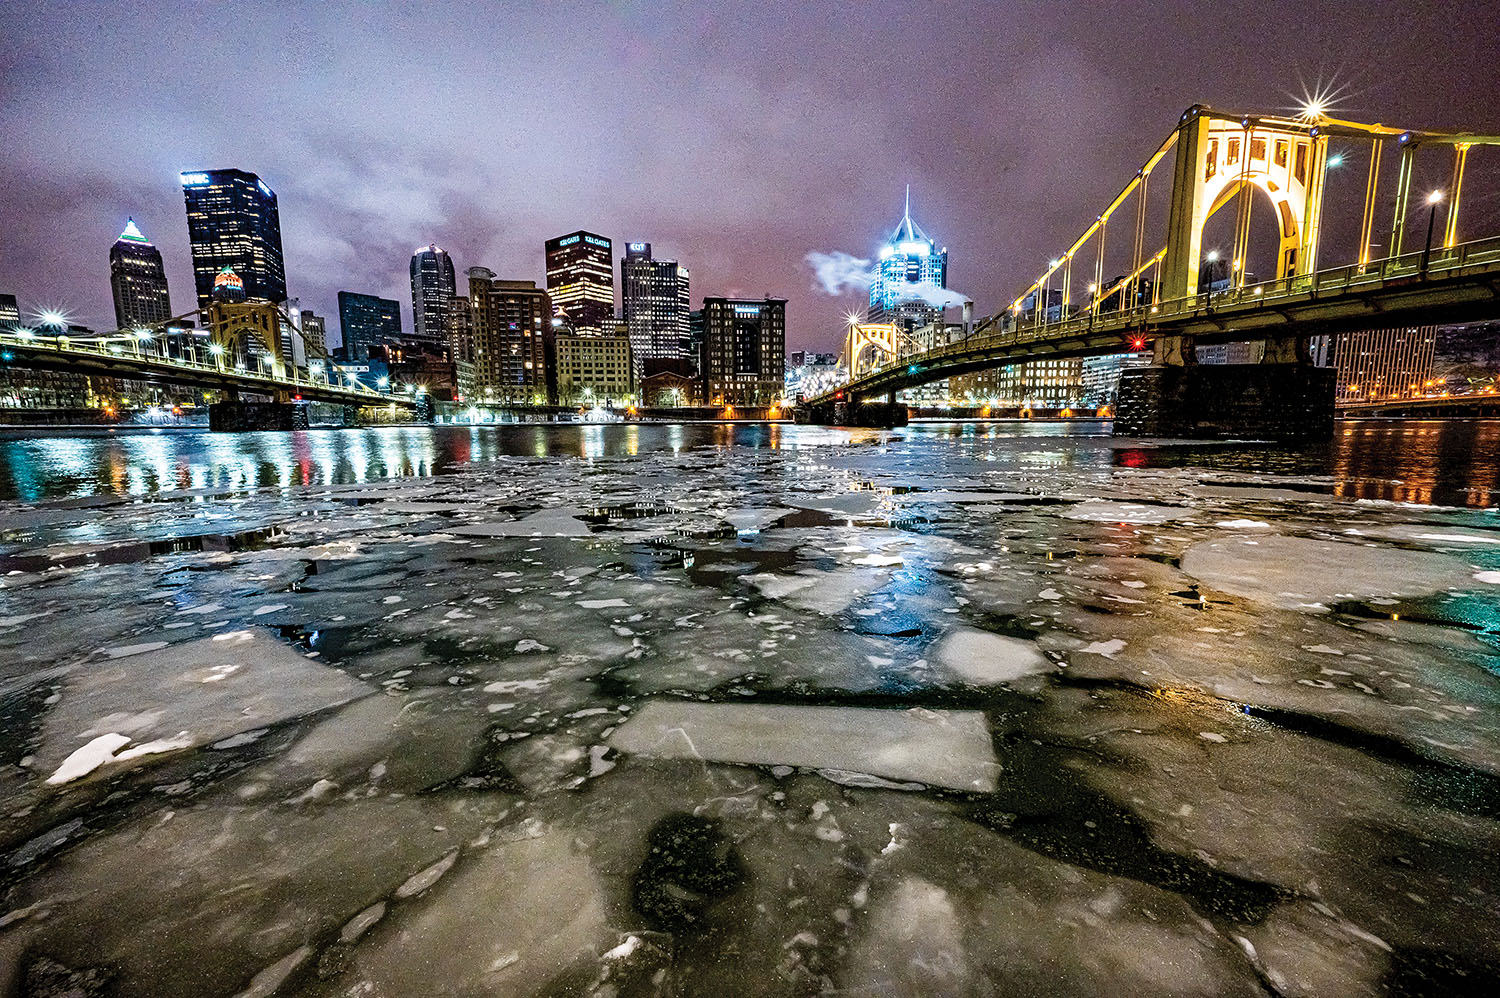 Ice forms on the Allegheny River in Pittsburgh, Pa., on January 25. Ice is a recurring concern in the winter for industries that rely on navigation to transport commodities. To get ahead of navigation impacts, the Ice Hydro Committee is composed of members from the Coast Guard, Corps of Engineers, National Weather Service, the Waterways Association of Pittsburgh and other stakeholders. (Photo by Michel Sauret/Pittsburgh Engineer District)